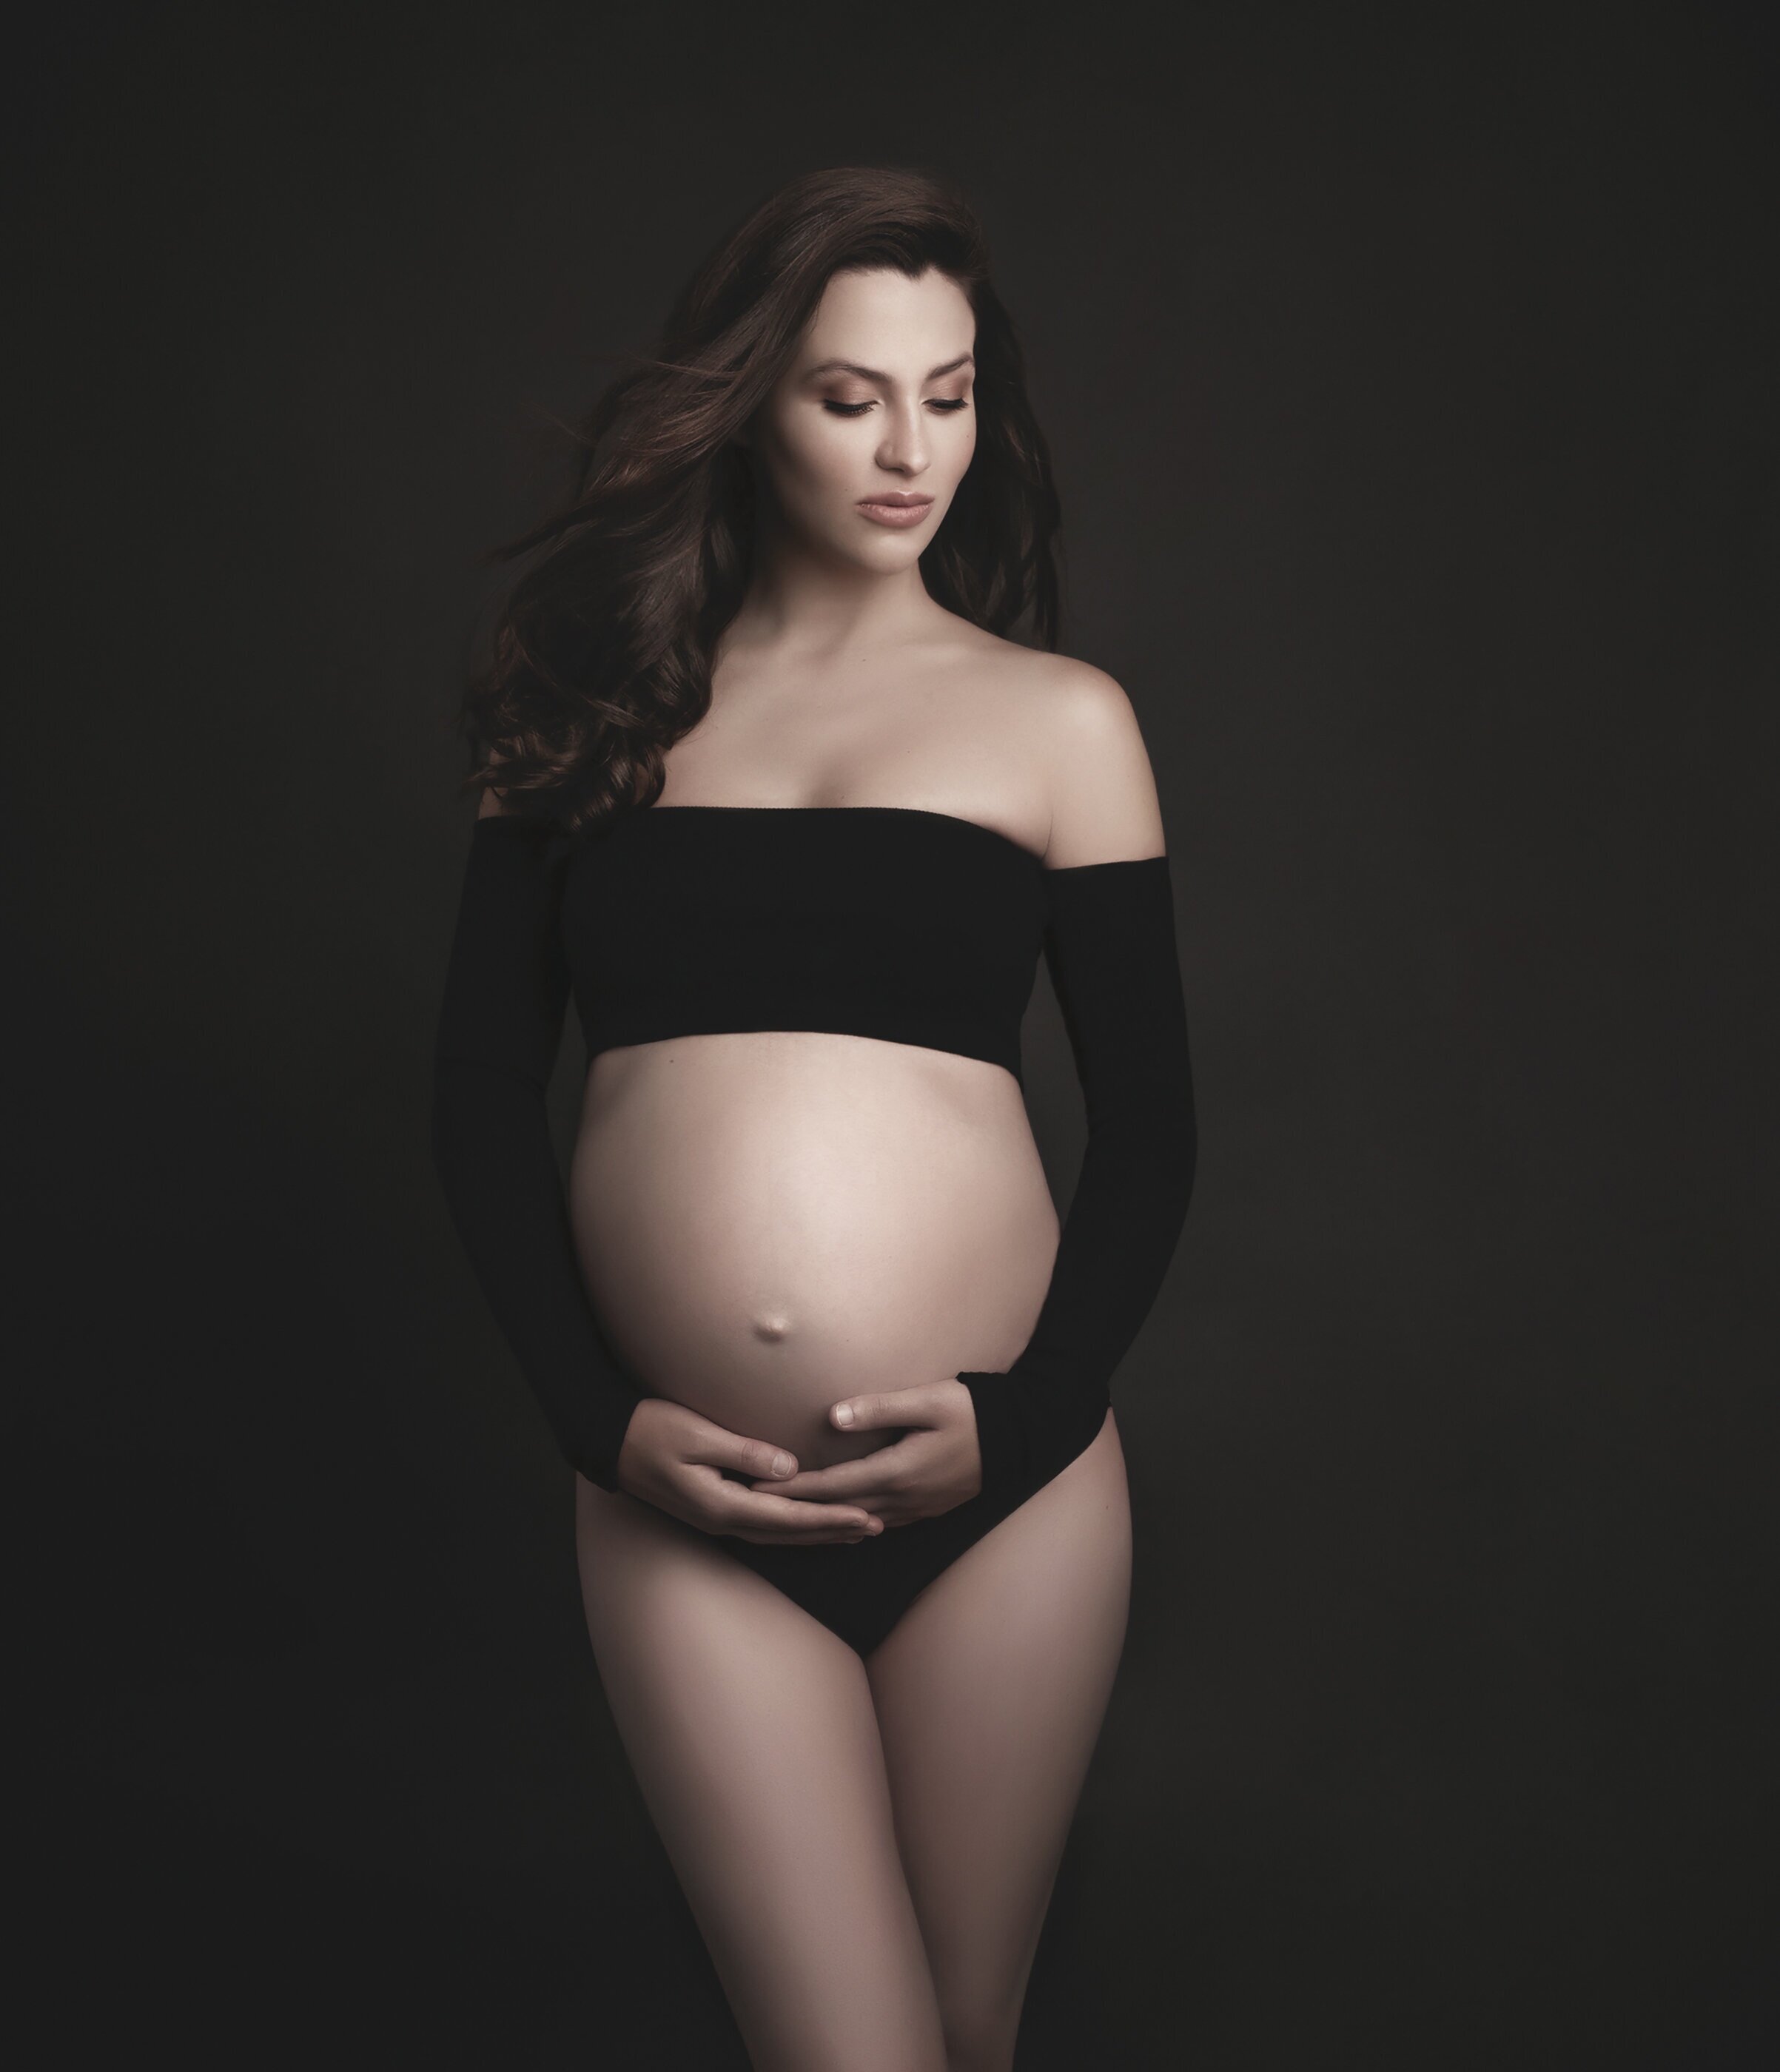 https://images.squarespace-cdn.com/content/v1/5950a4c637c5812dce6900b3/1588030299322-ILCA4U2DG52JKY6JOLYN/Best+Pregnancy+sessions+in+Vancouver+BC+by+Liliya+Lubenkova+Portraits